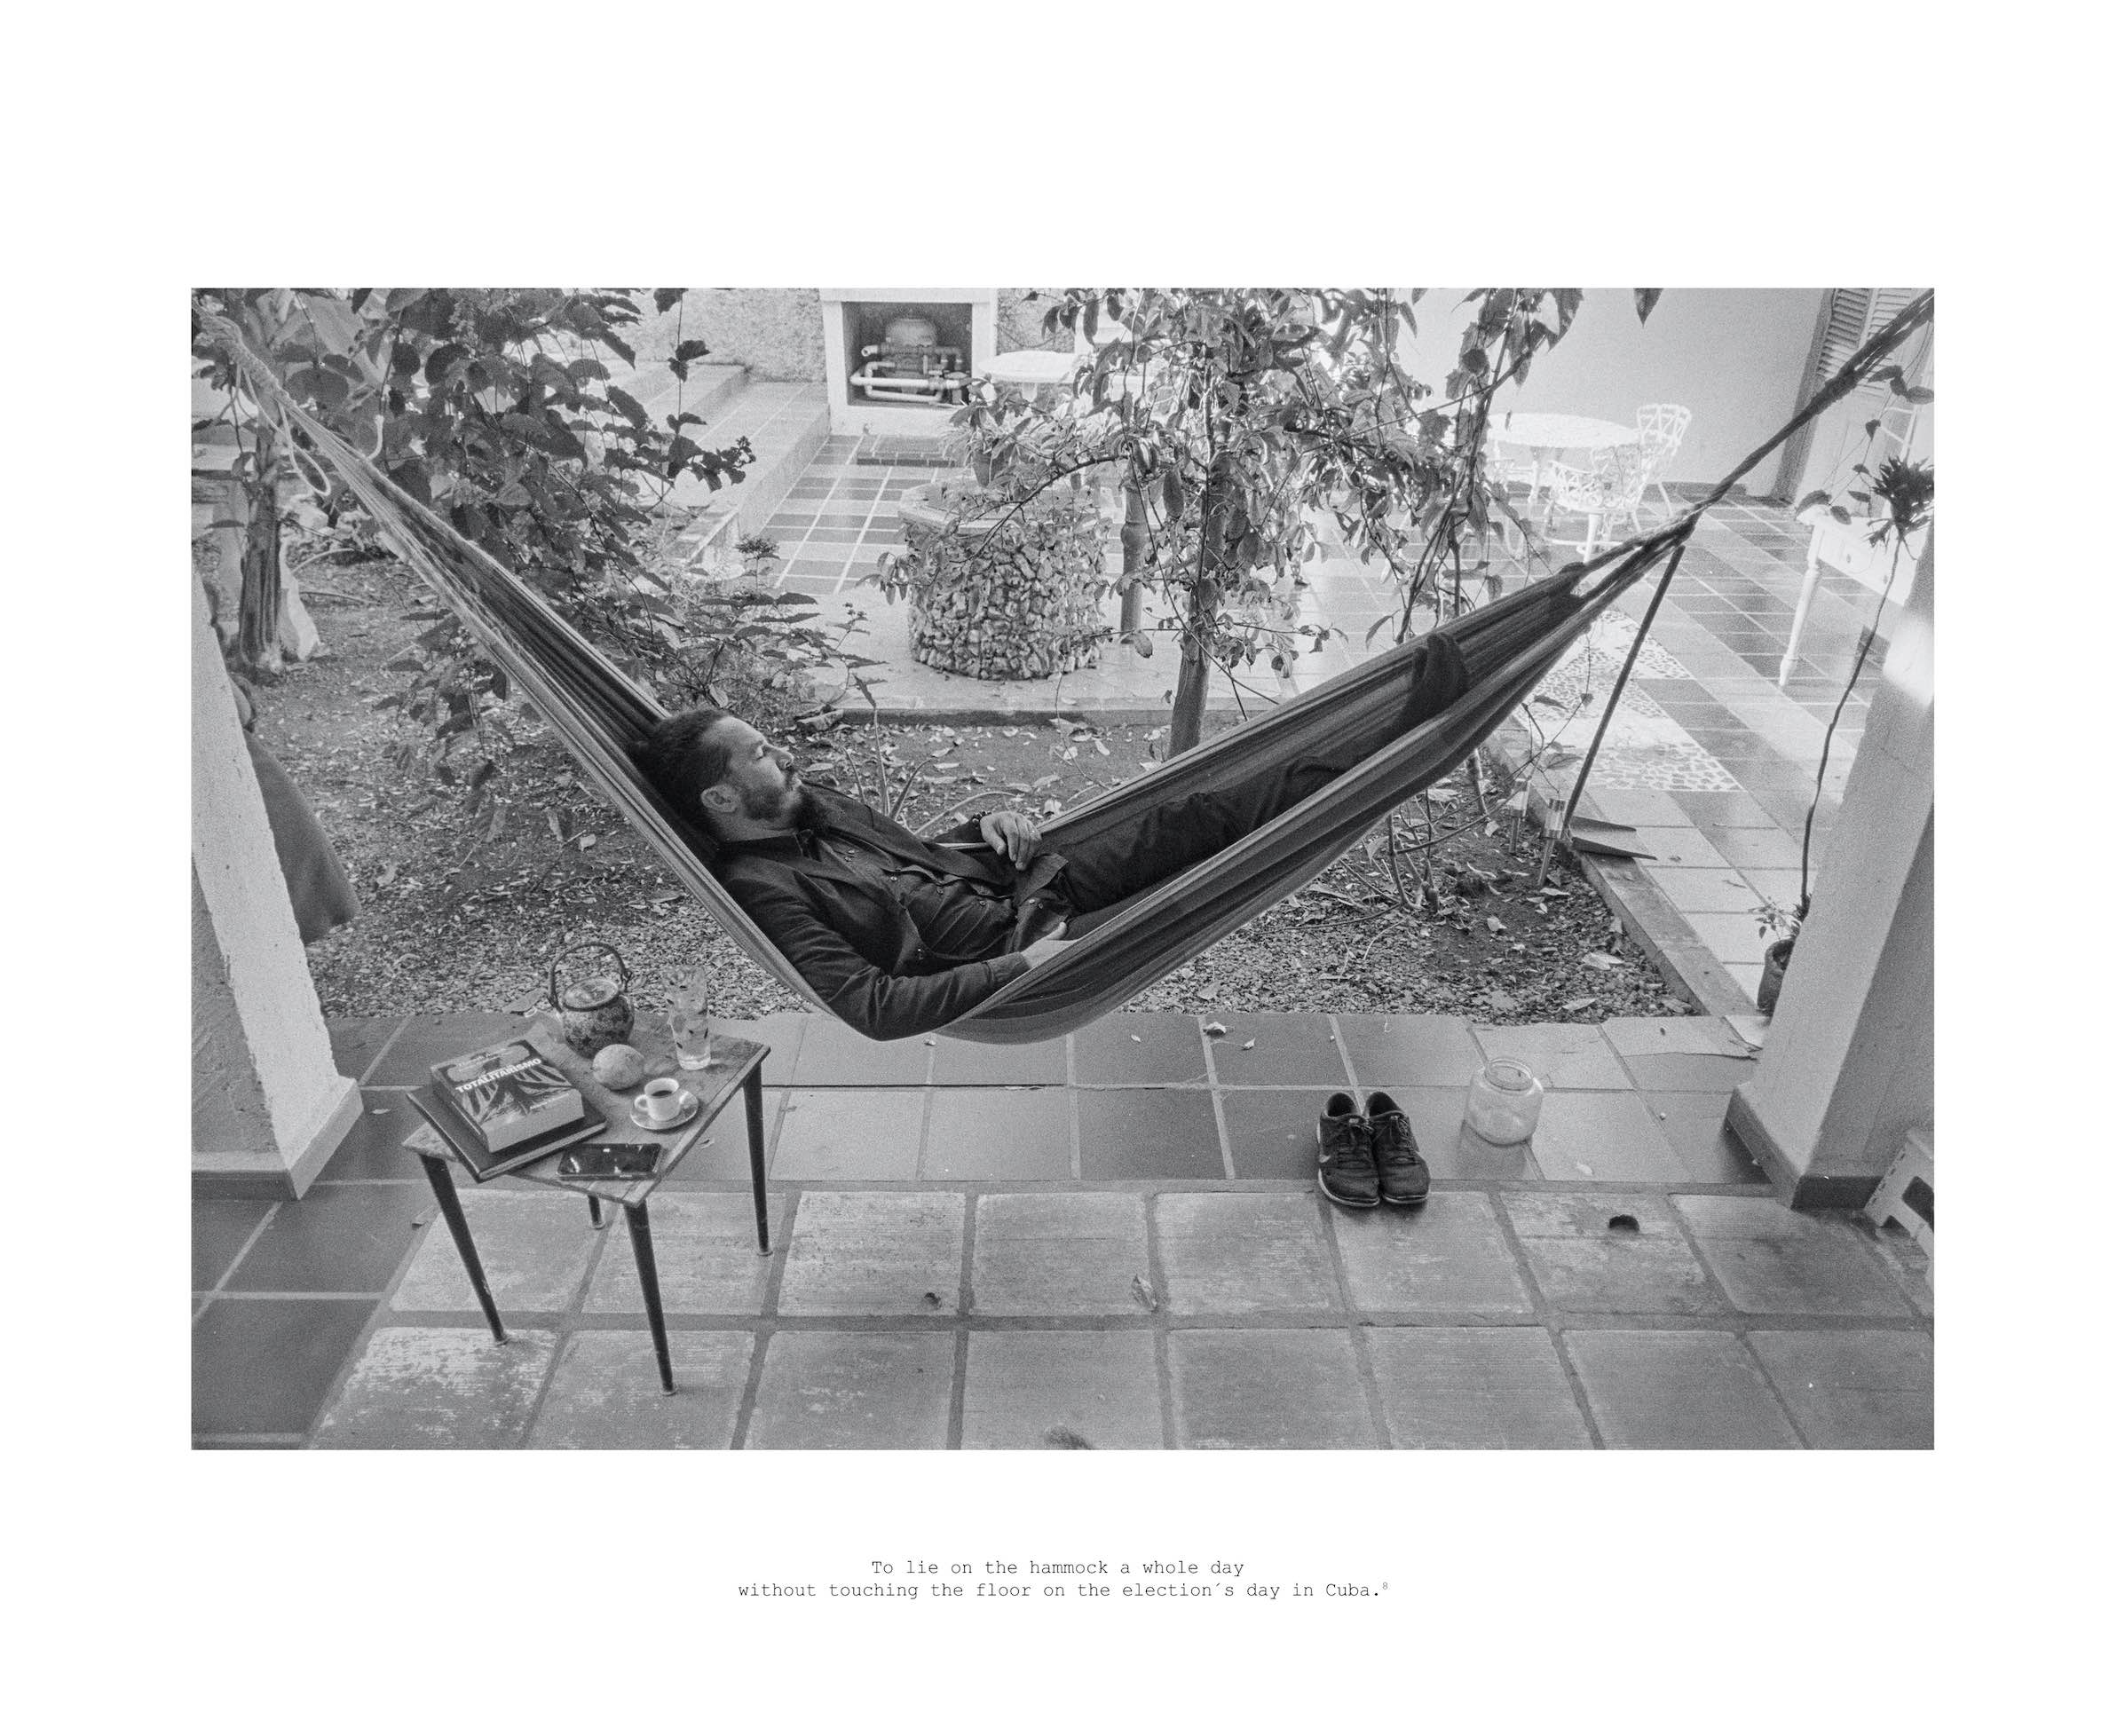 Reynier Leyva Novo - Blank Check - About how to empty the mind (To lie on the hammock a whole day without touching the floor on the election's day in Cuba), 2020, 35 mm photograph, archival print on Hahnemuhle photo rag Baryta paper, 18 x 22 inches unframed, edition of 3